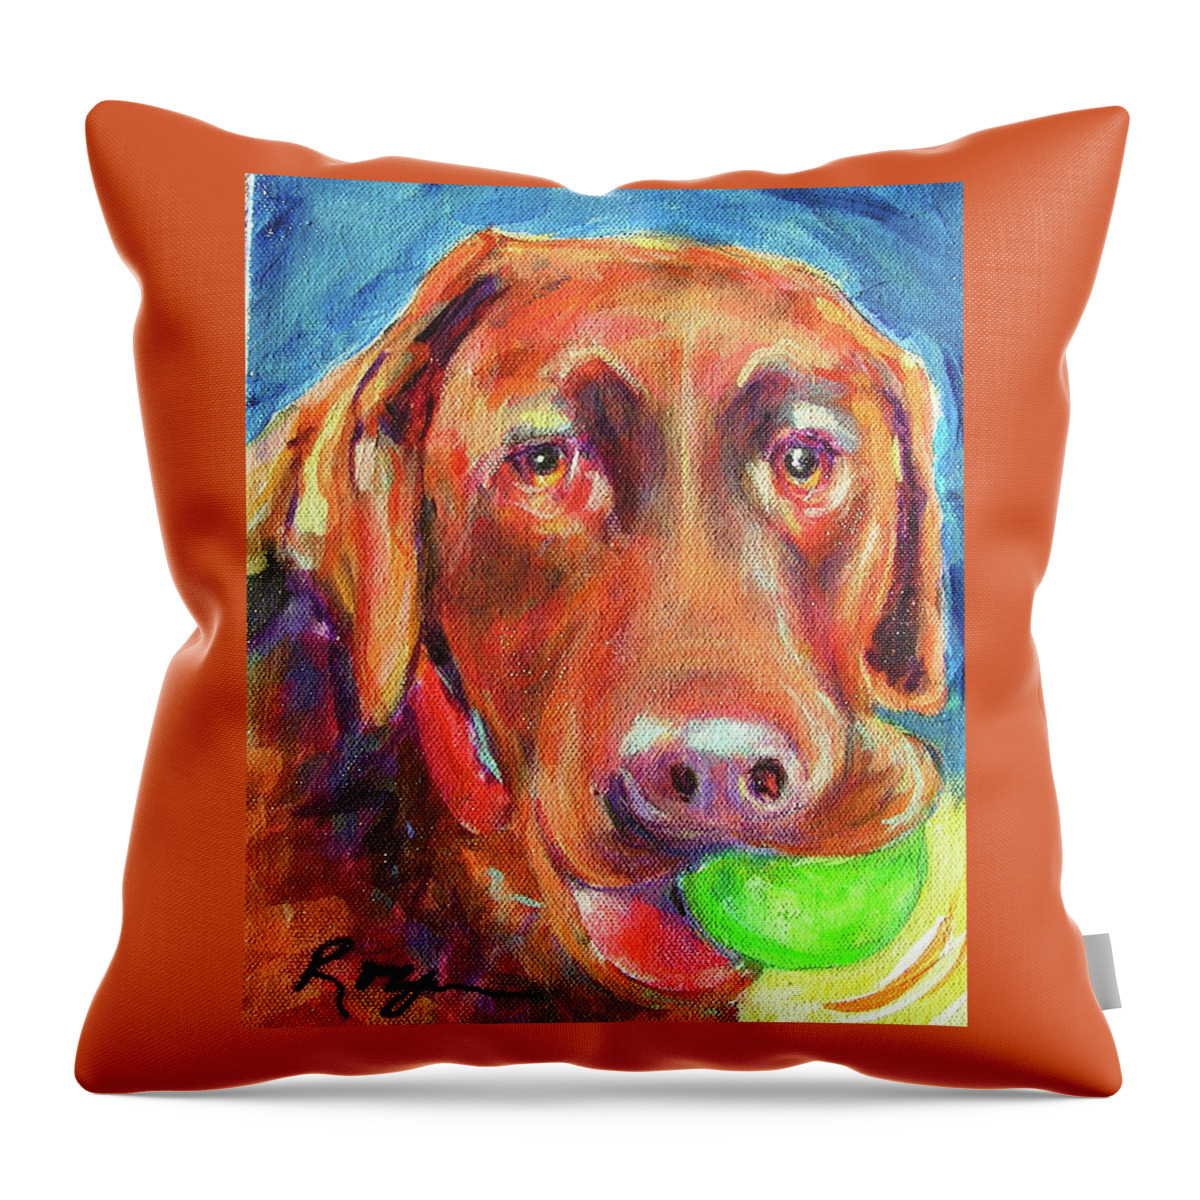  Throw Pillow featuring the painting Harper by Judy Rogan